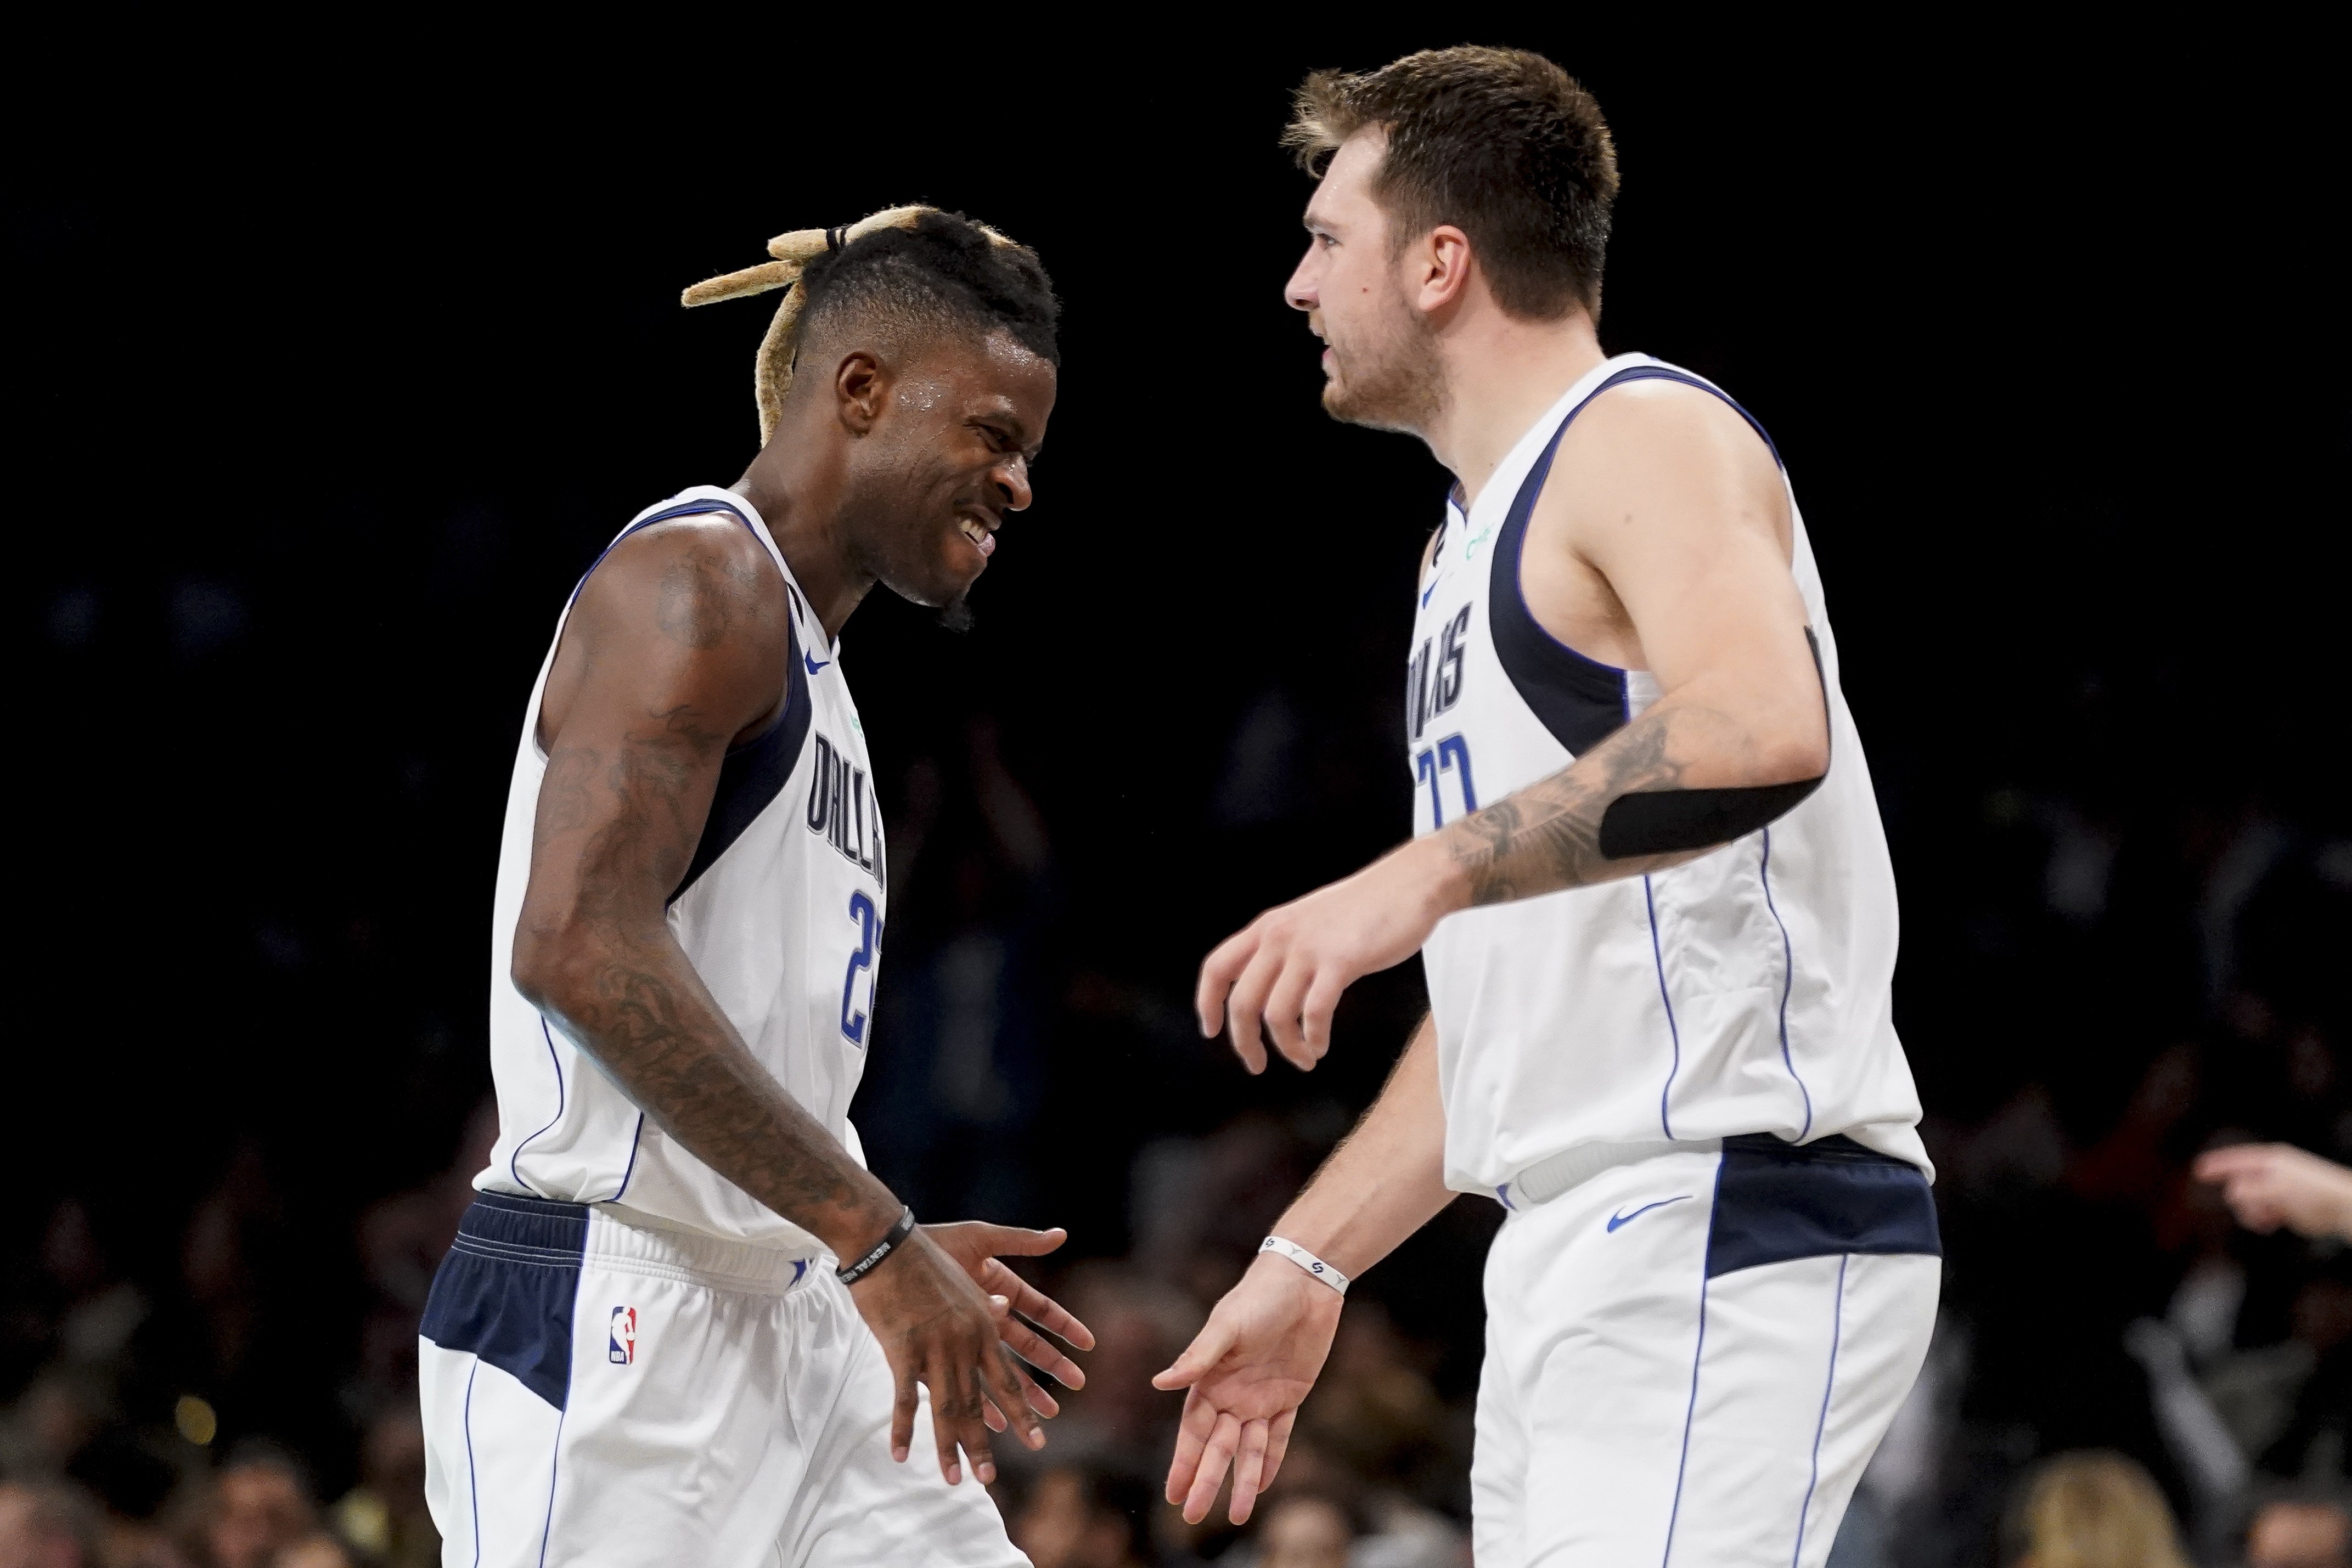 How do you think Maxi Kleber is feeling watching this? : r/nba